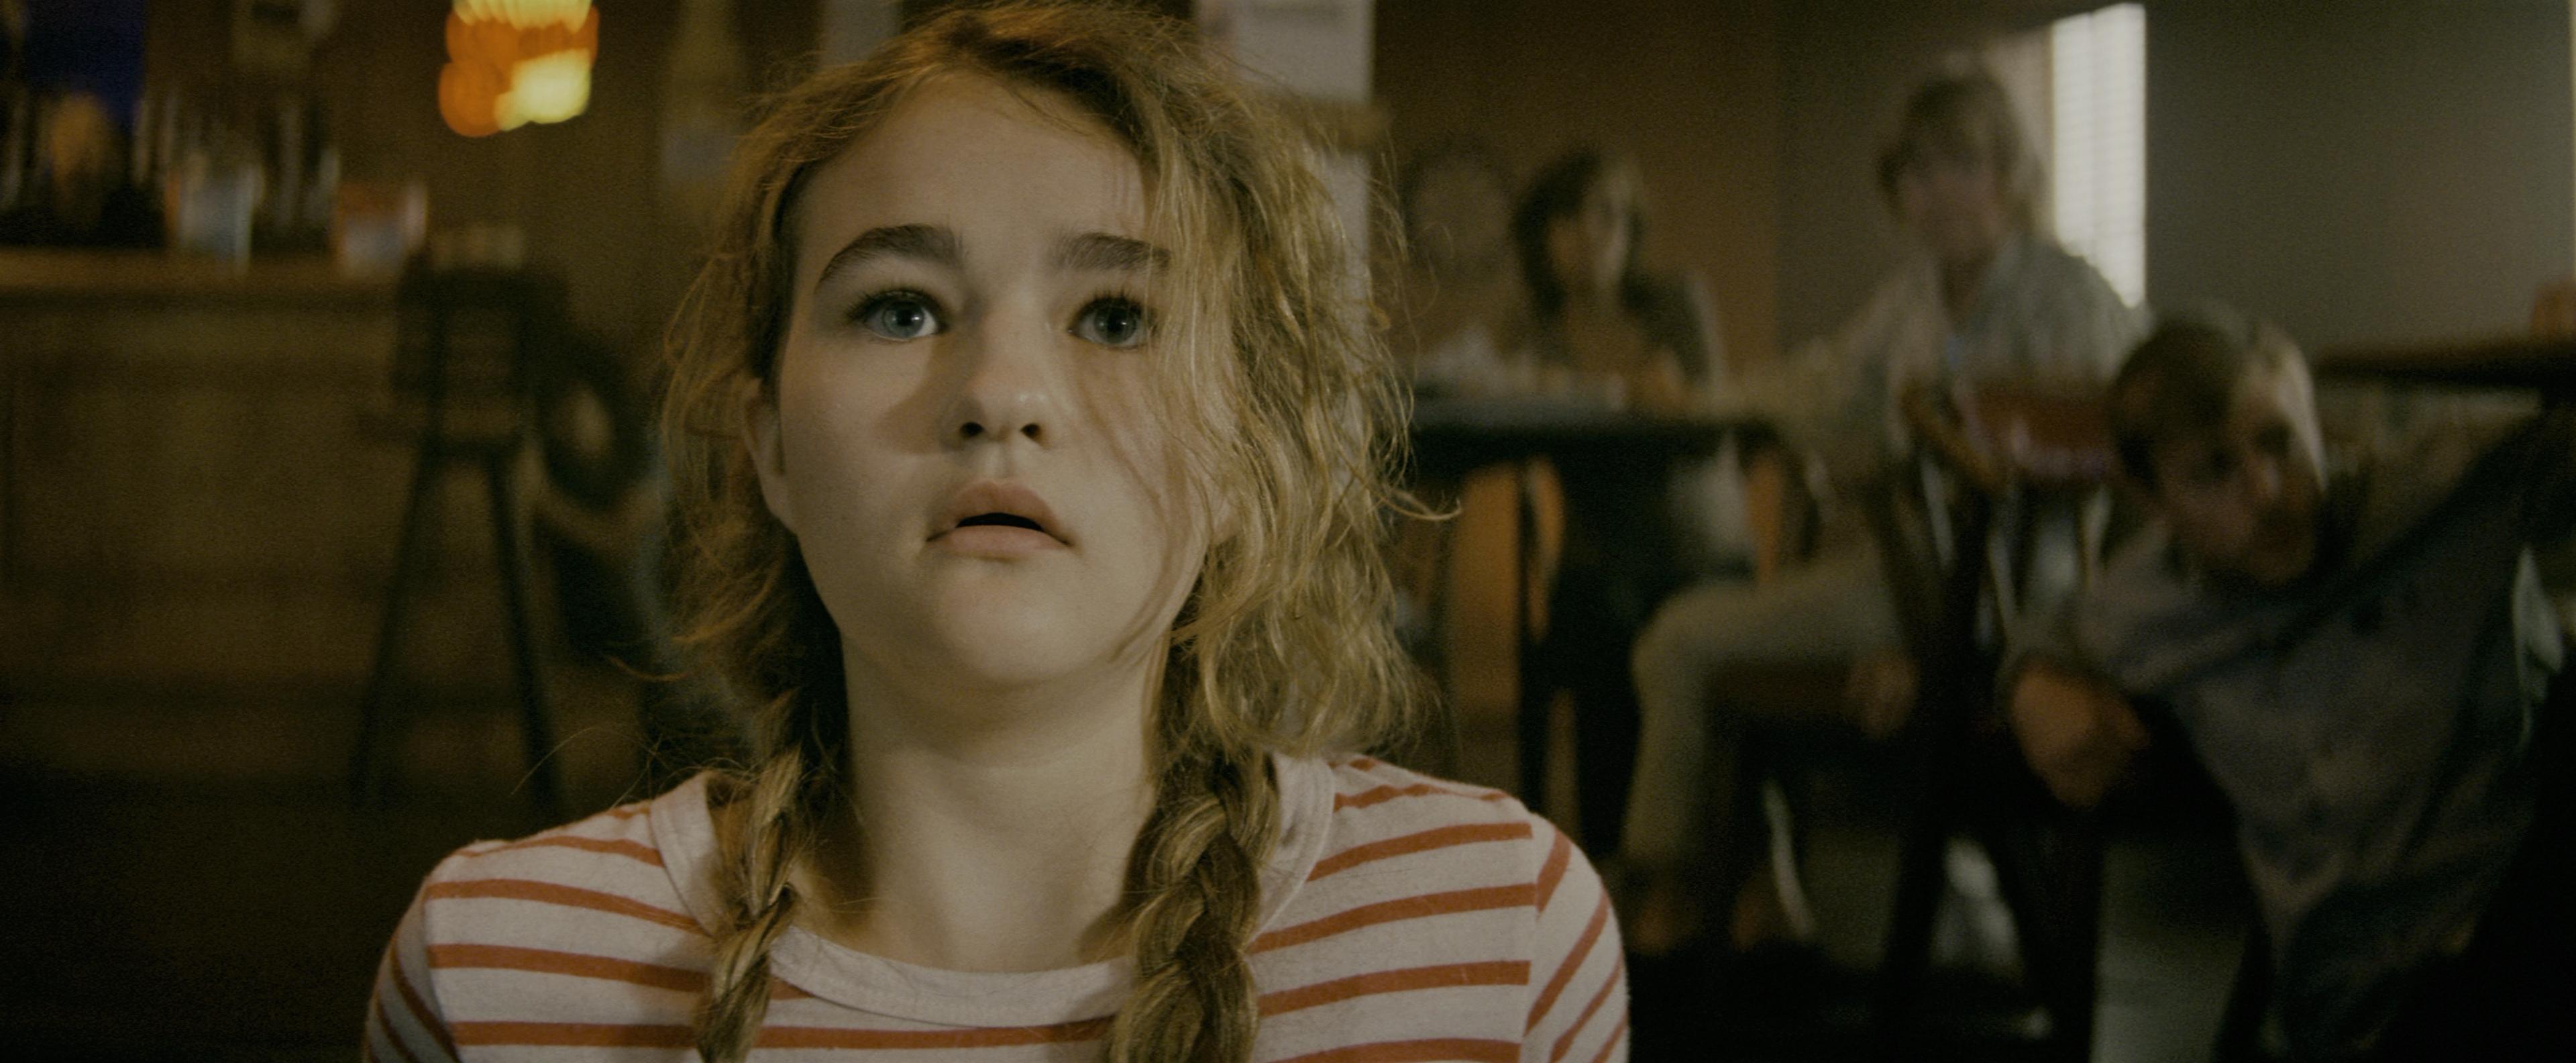 Millicent Simmonds, Star Of ‘A Quiet Place,’ Believes Hollywood Is Becoming More Deaf-Inclusive